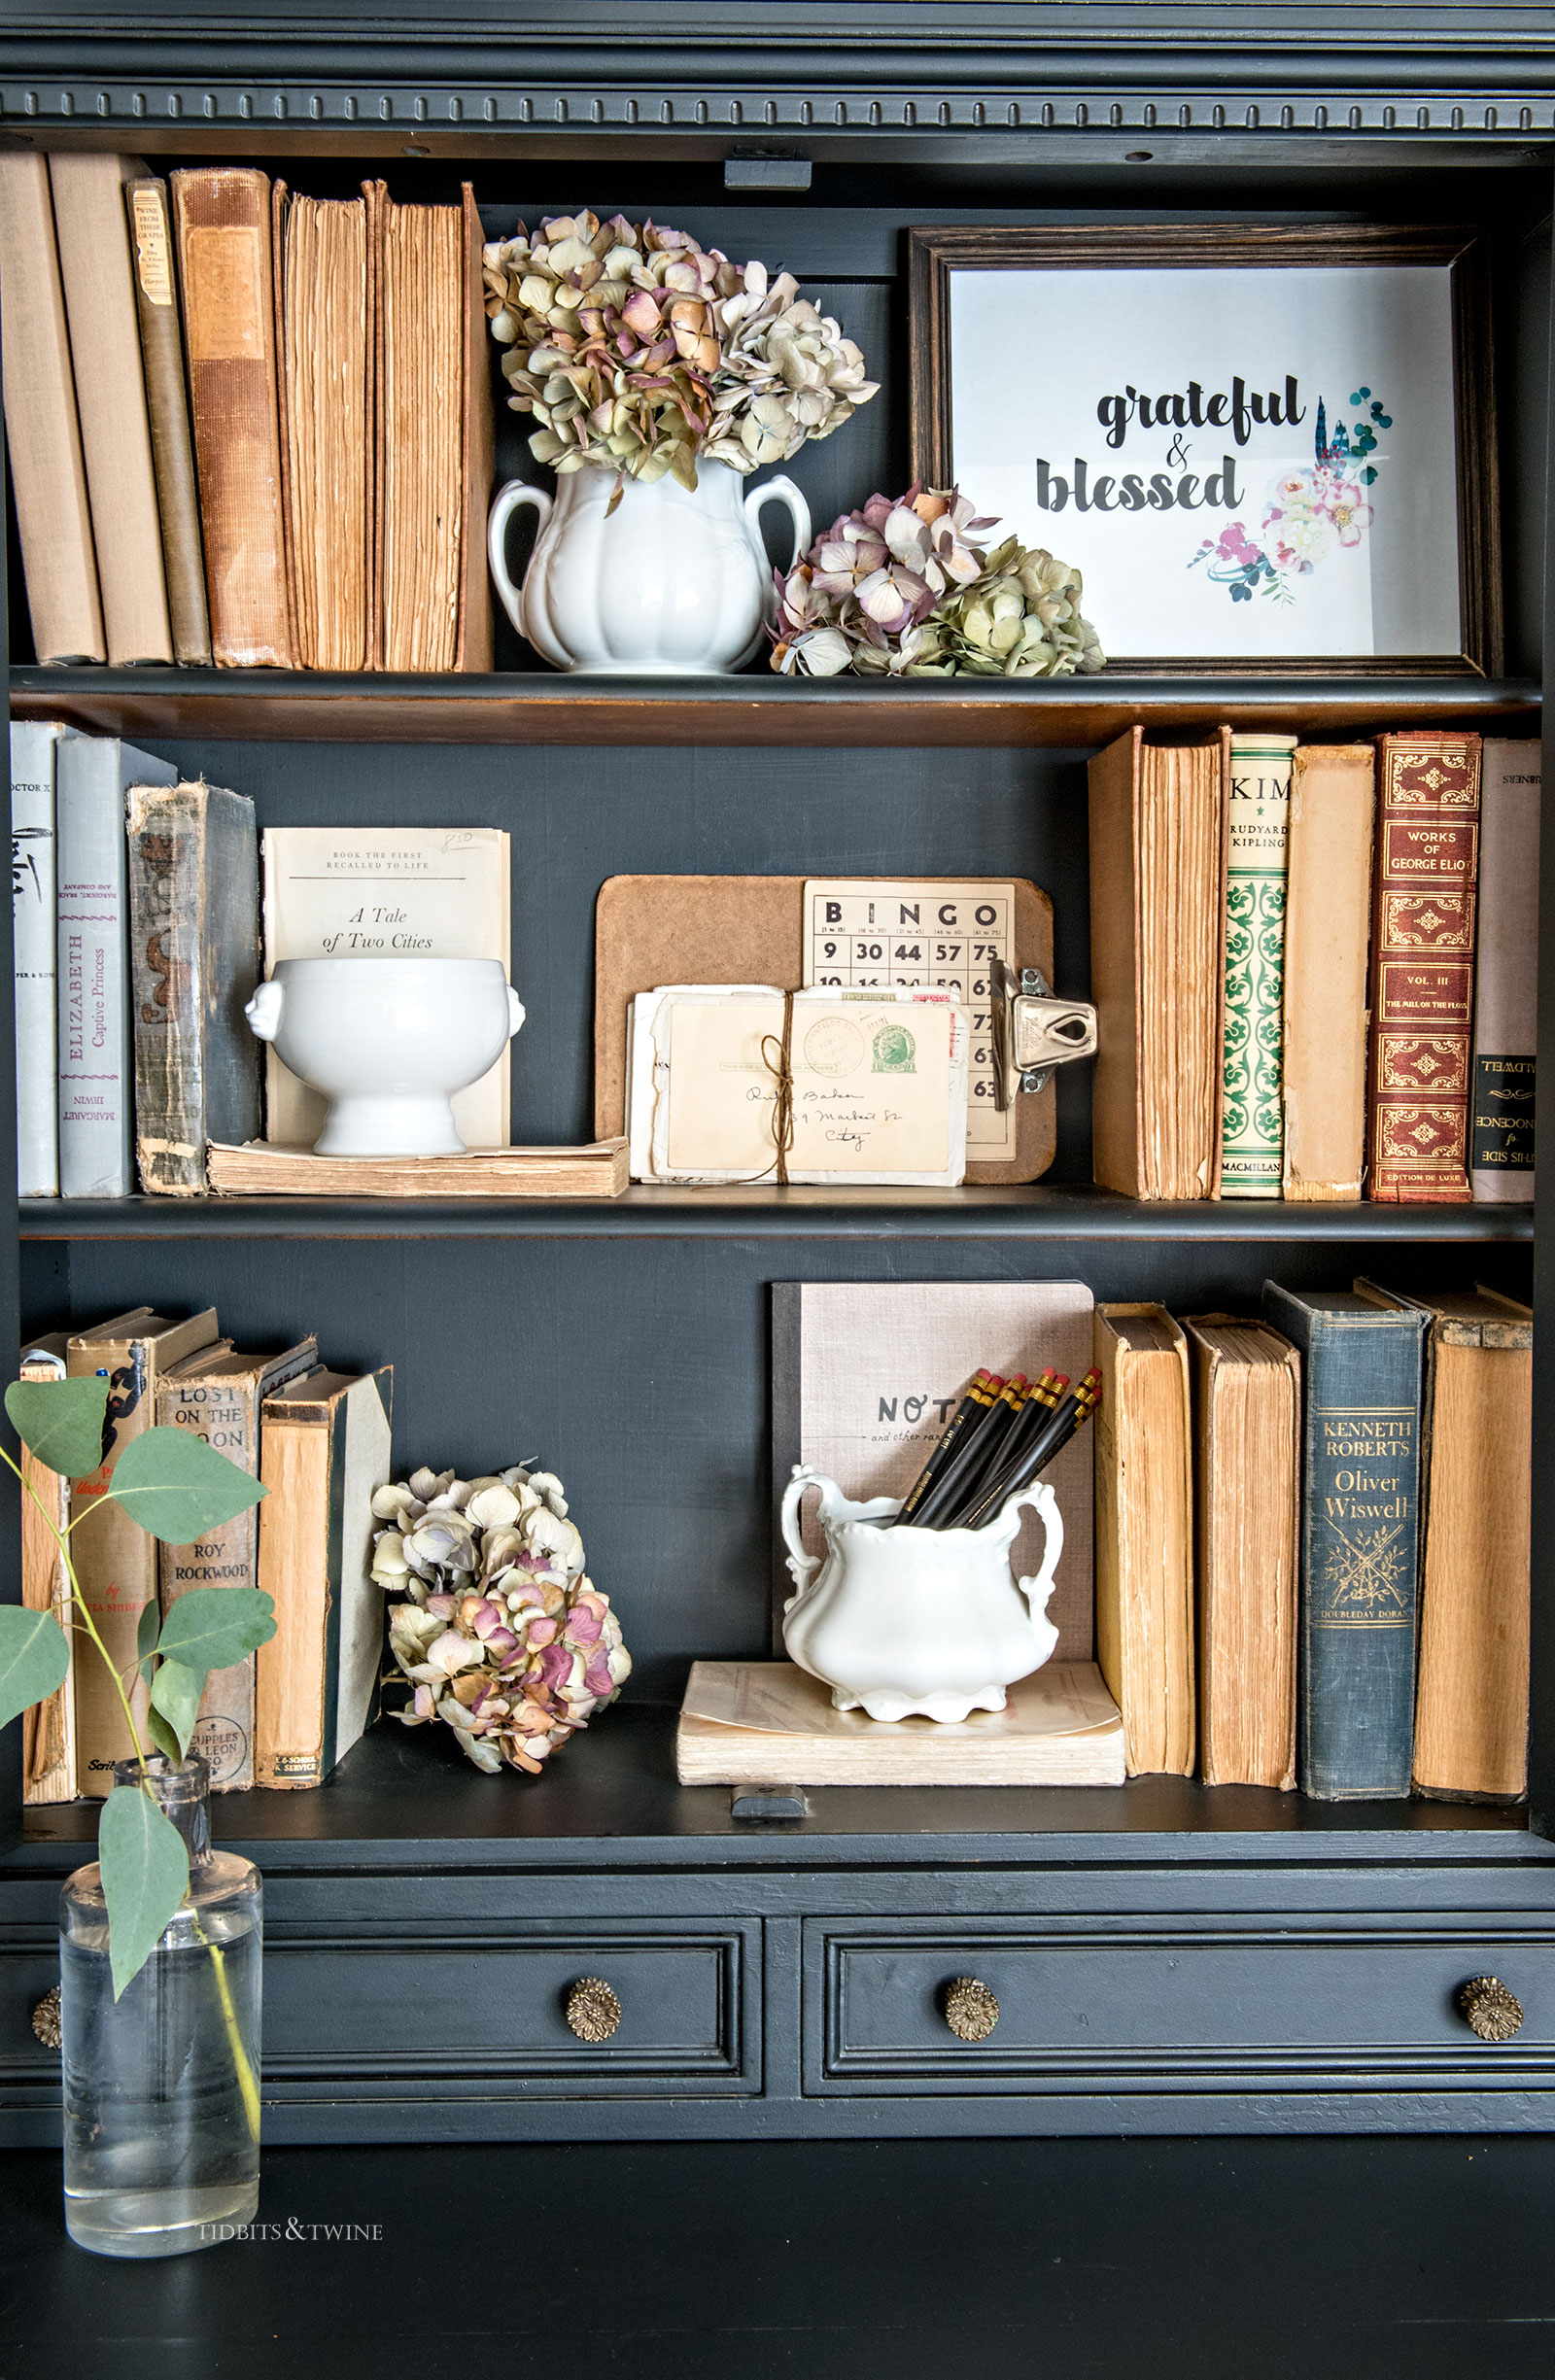 Black styled bookshelf holding vintage books and dried flowers for Fall